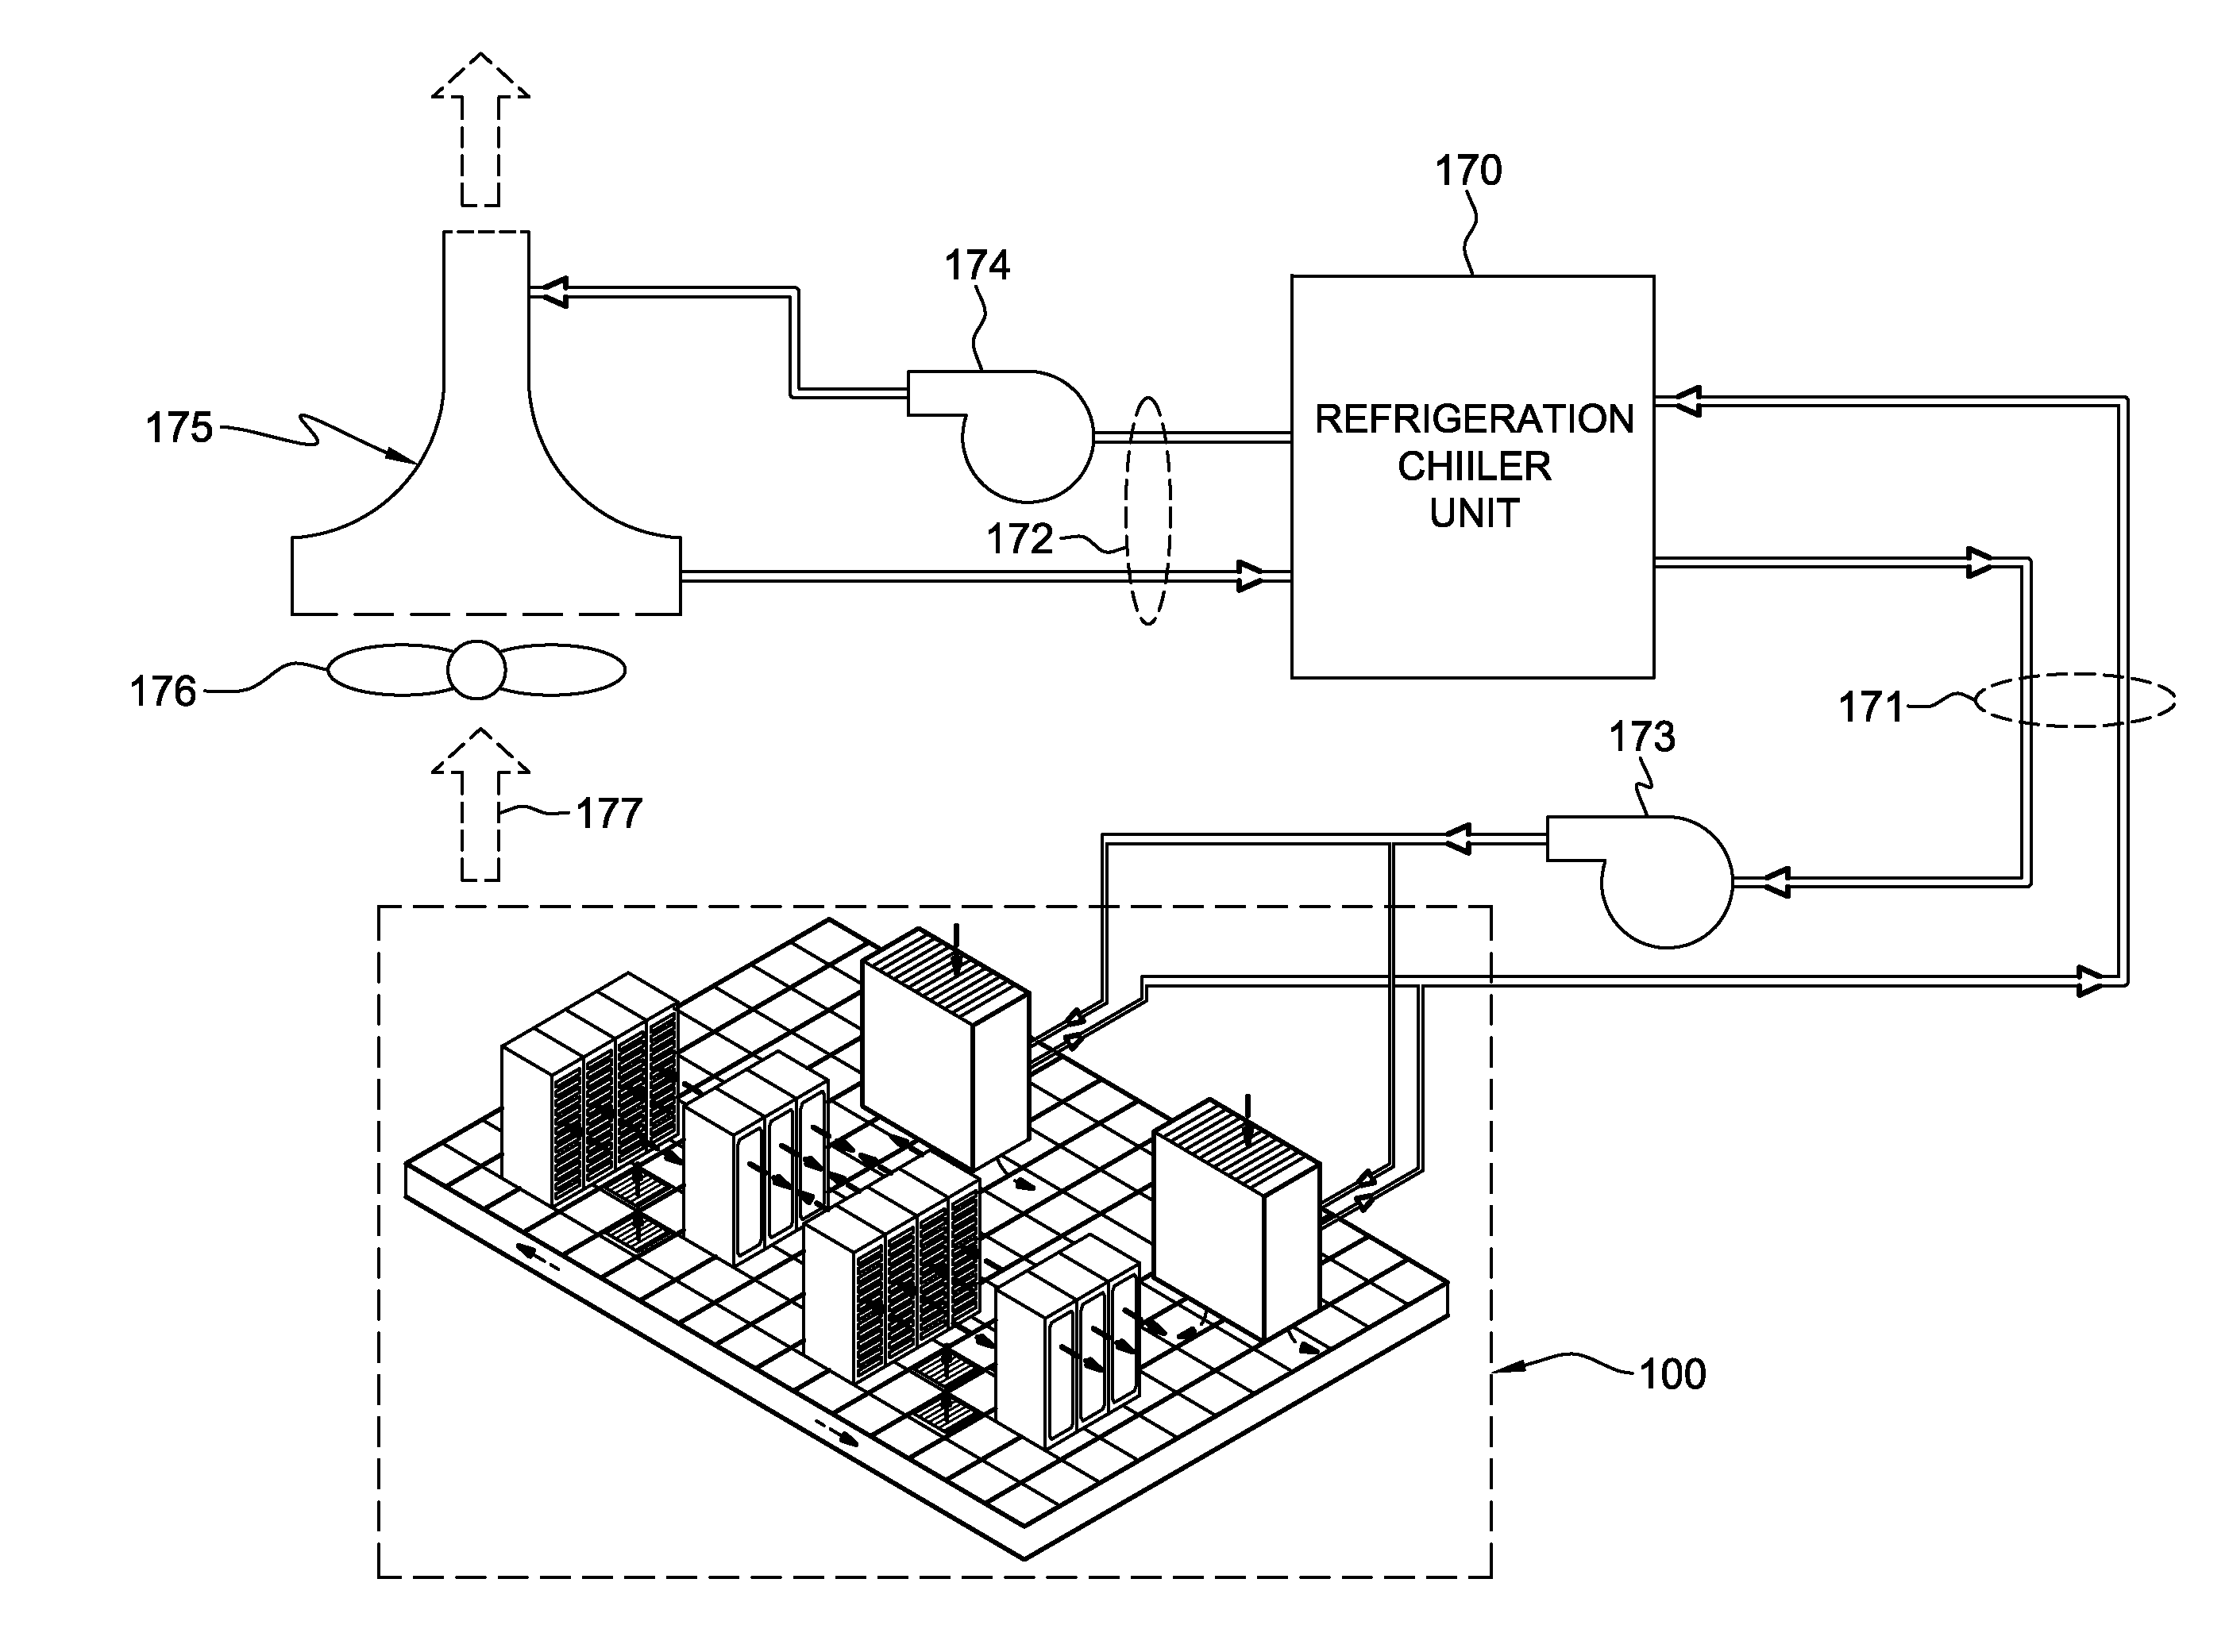 Ground-based heat sink facilitating electronic system cooling